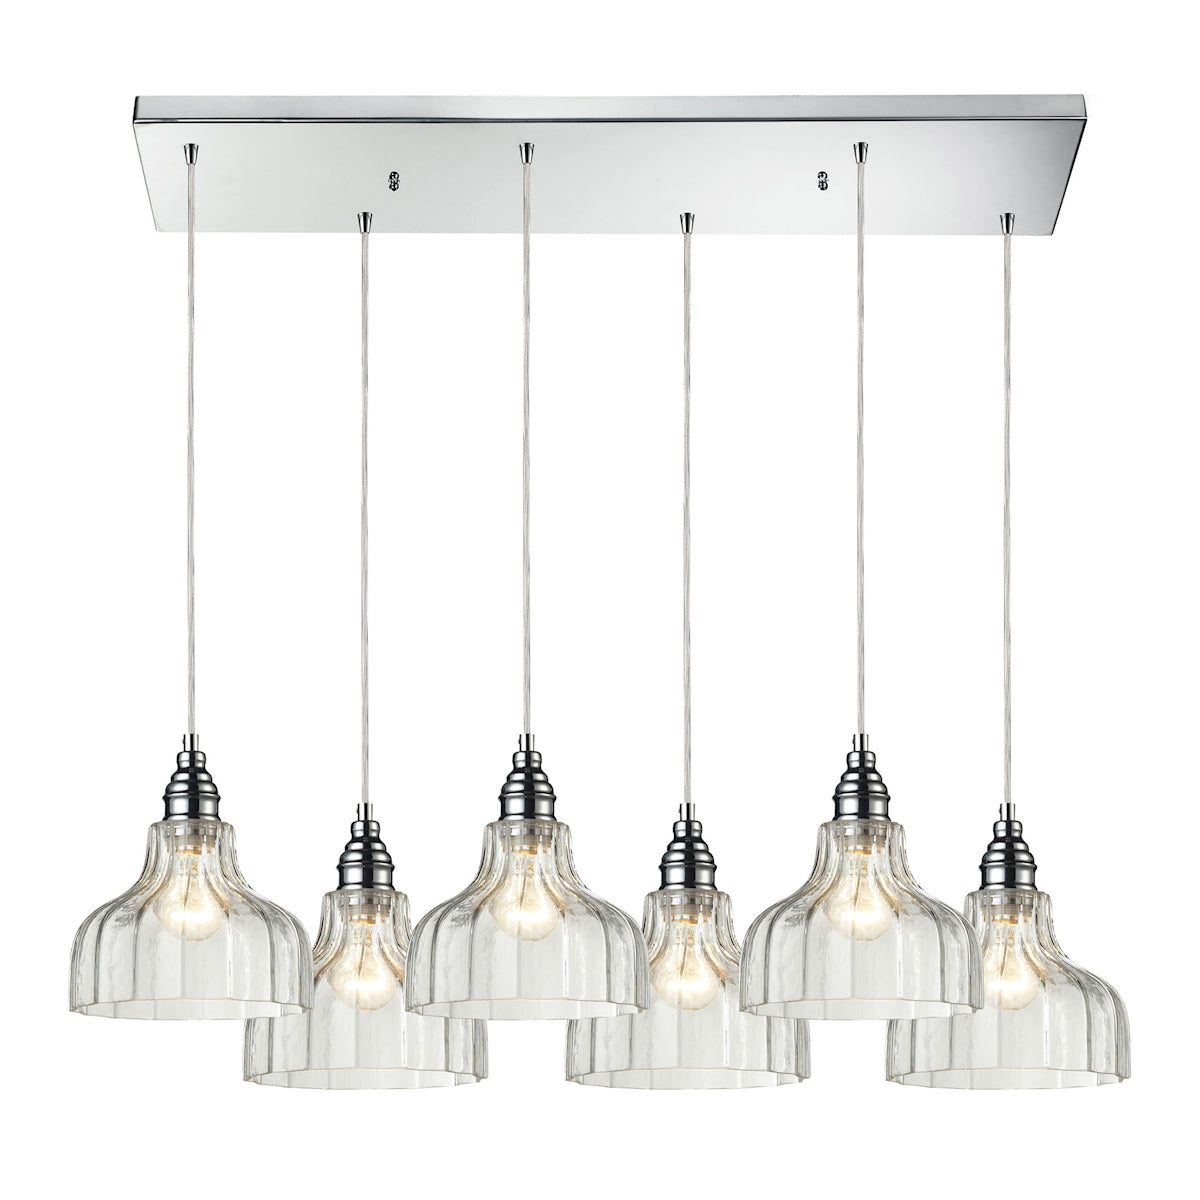 ELK Lighting 46018/6RC Danica 6-Light Rectangular Pendant Fixture in Polished Chrome with Clear Glass